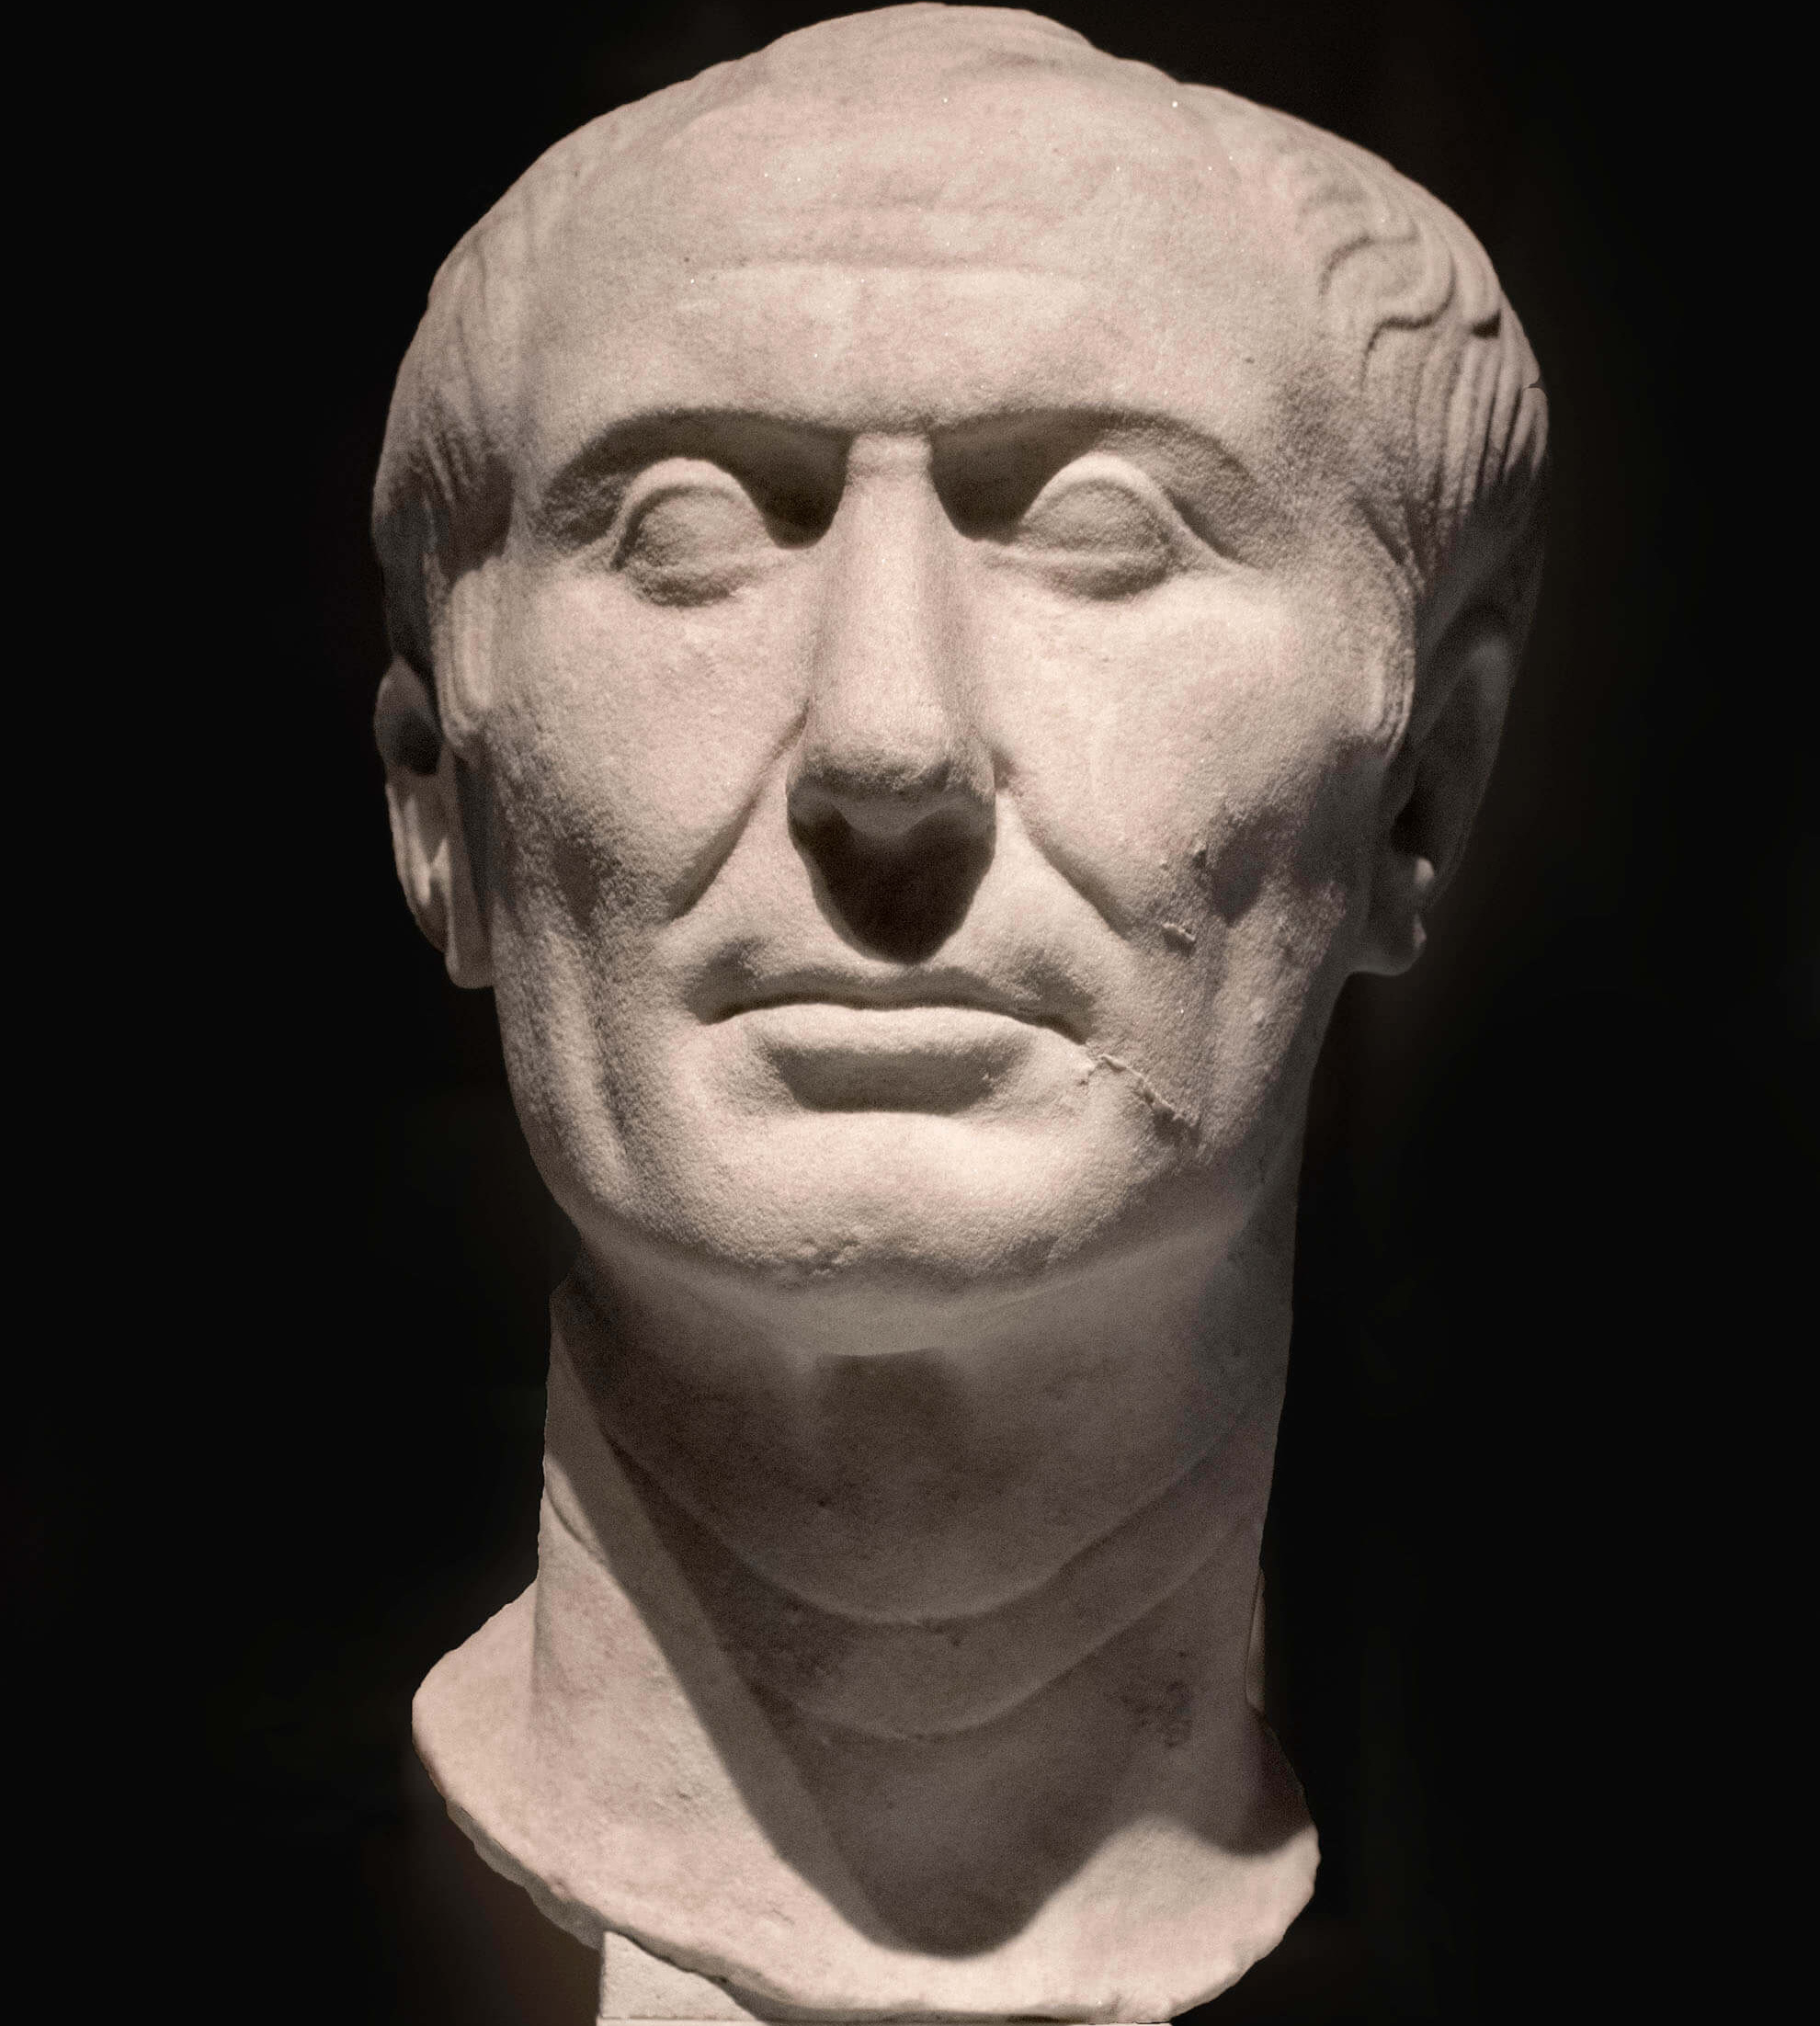 Marble bust of Gaius Julius Caesar, dated between 50-40 BC, today exhibited in the Museo di antichità in Turin.